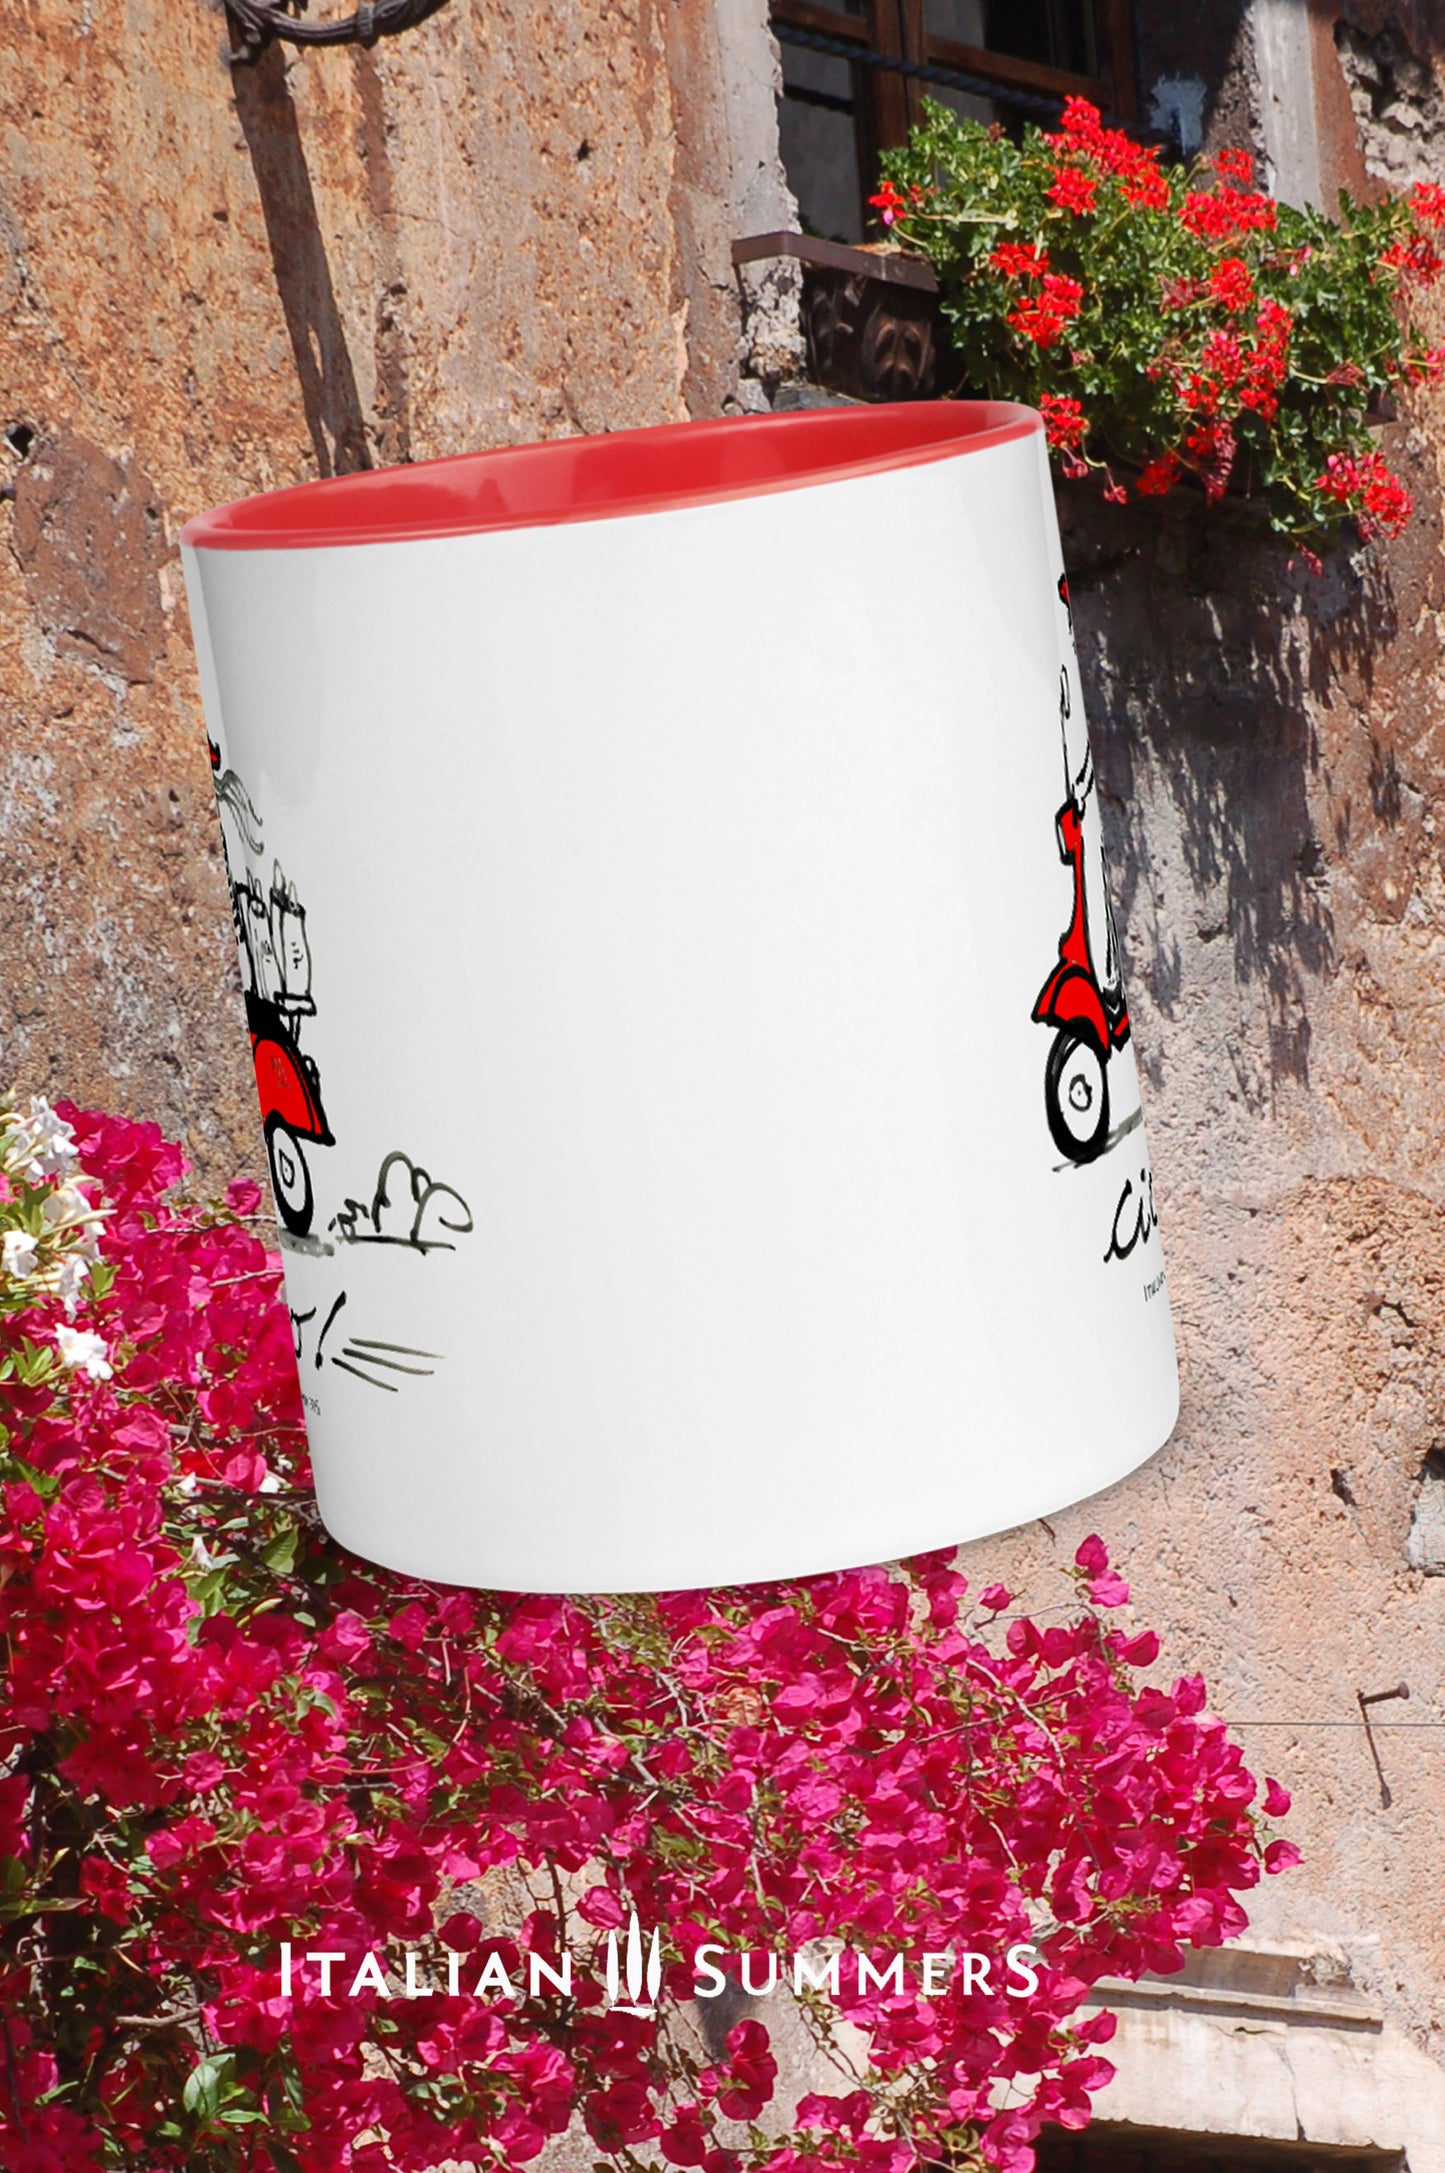 Italy inspired mug with a sketch of a lady with long hair and a red hat driving a red Italian vintage scooter. On the back of the scooter she has her shopping bags. The lady and the Vespa are seen from the side. Under the Italian sketch is the word Ciao! in black handwriting. The mug has a red color inside and a red handle. Made by Italian Summers.